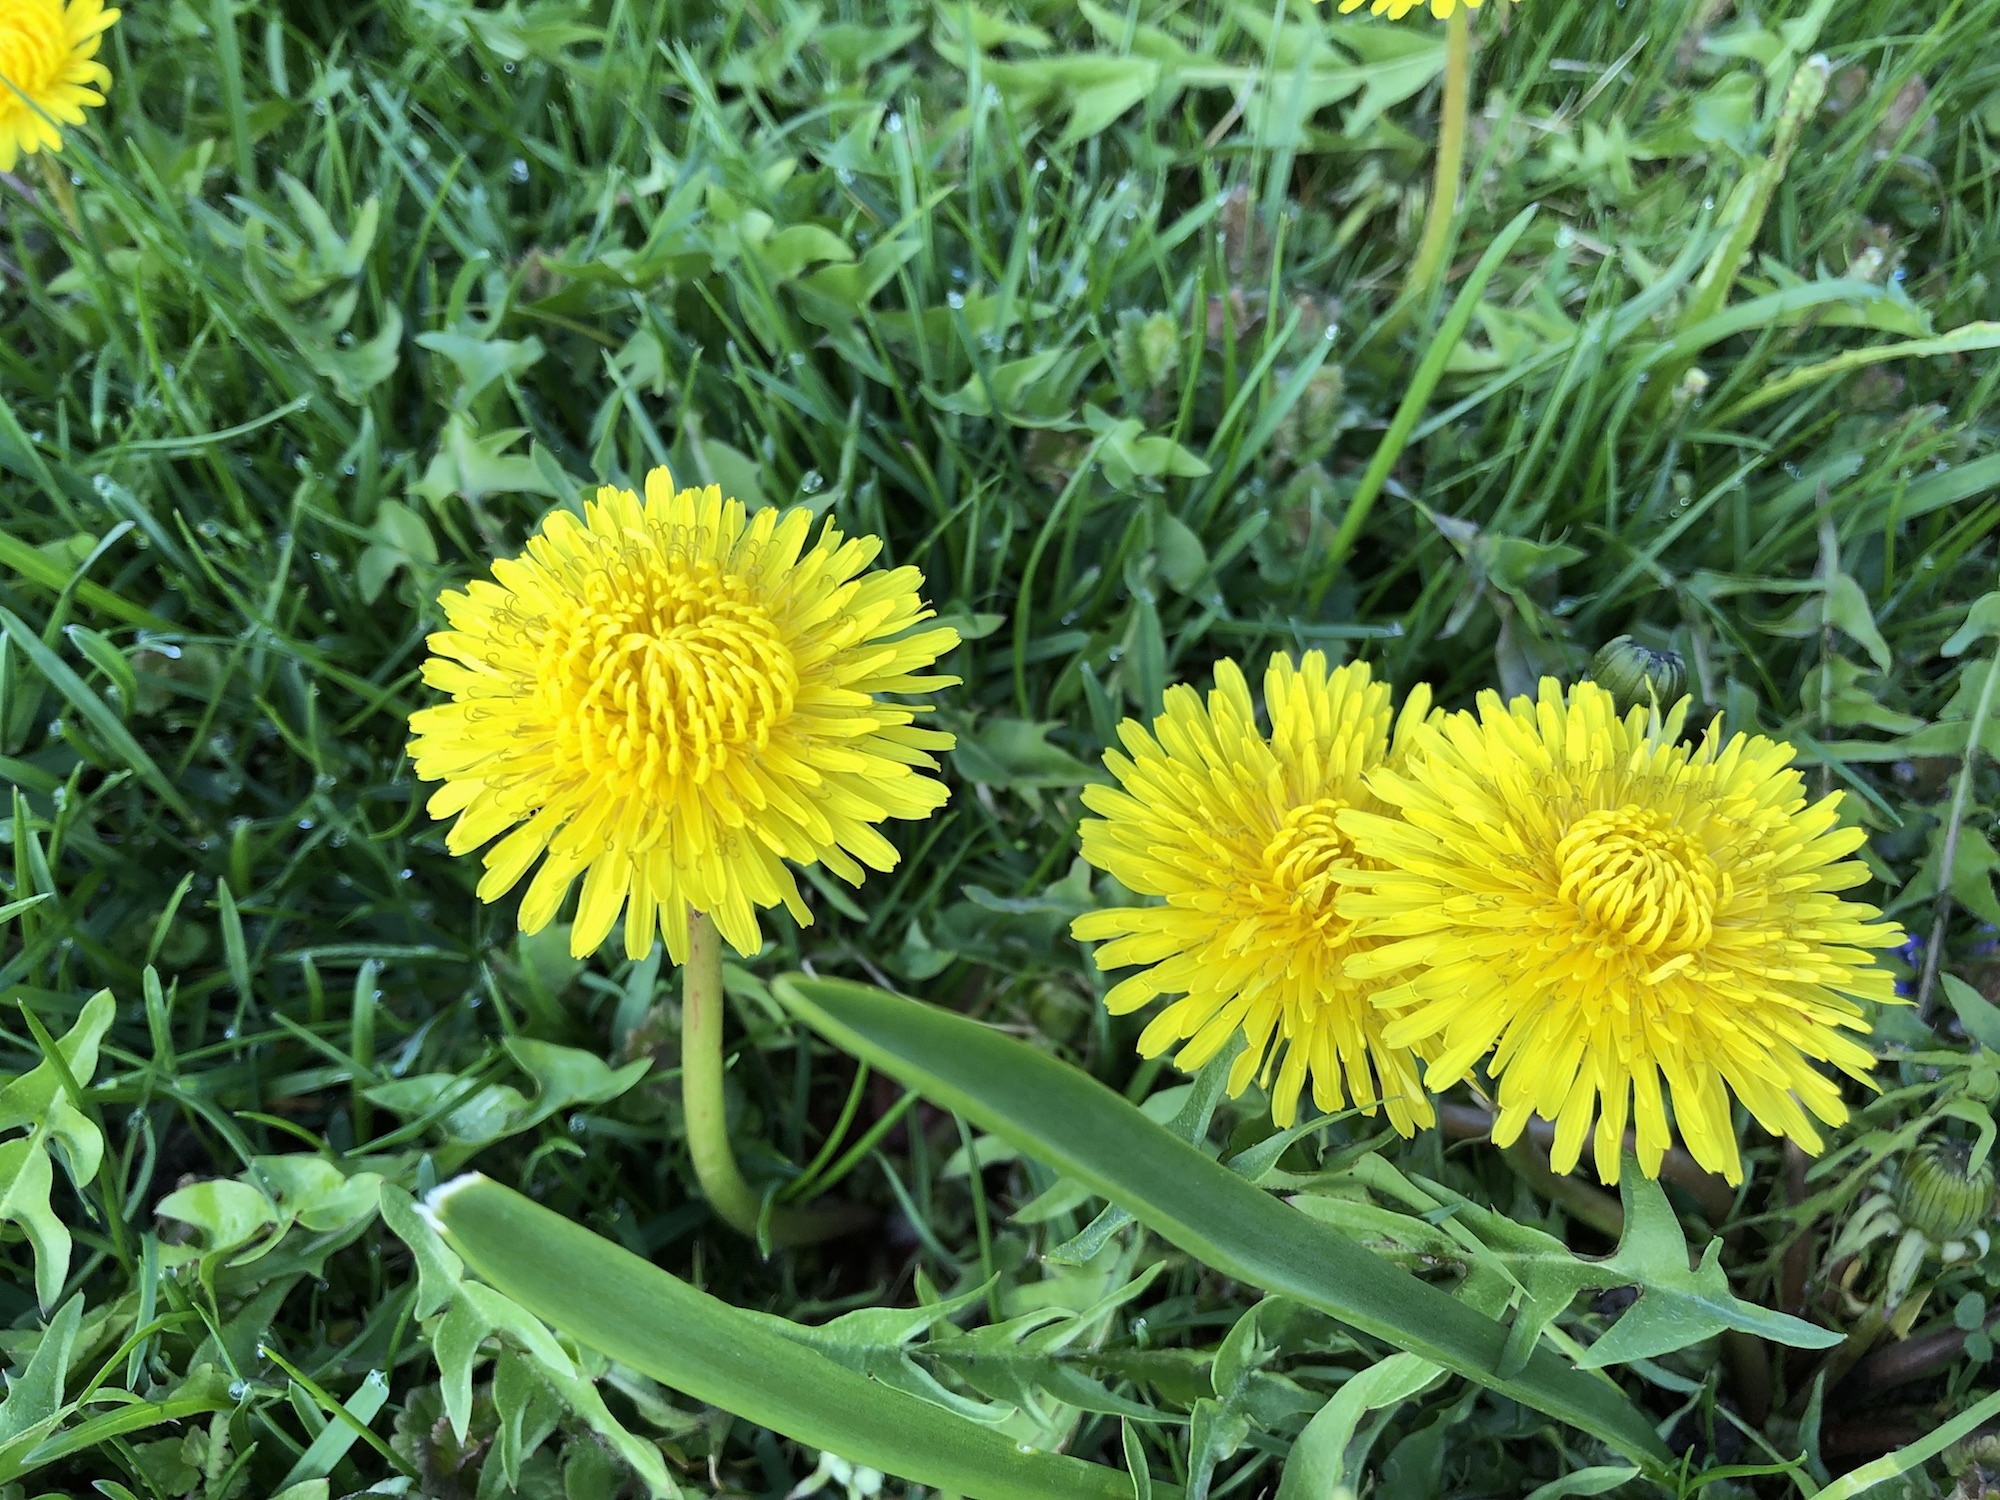 Dandelion by Stevens Pond in Madison, Wisconsin on May 5, 2019.